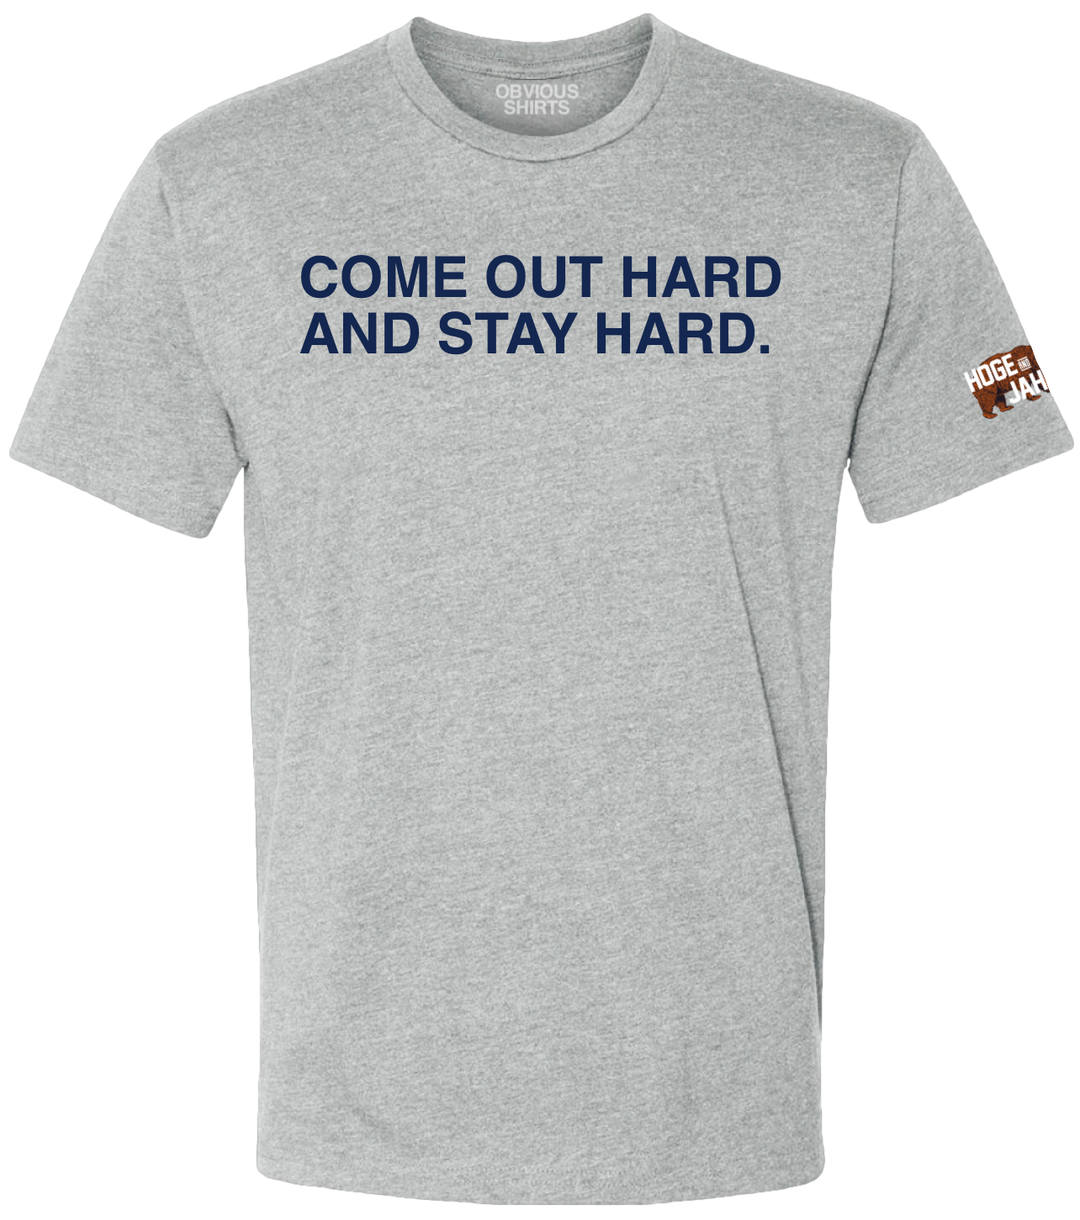 COME OUT HARD AND STAY HARD. (GREY)